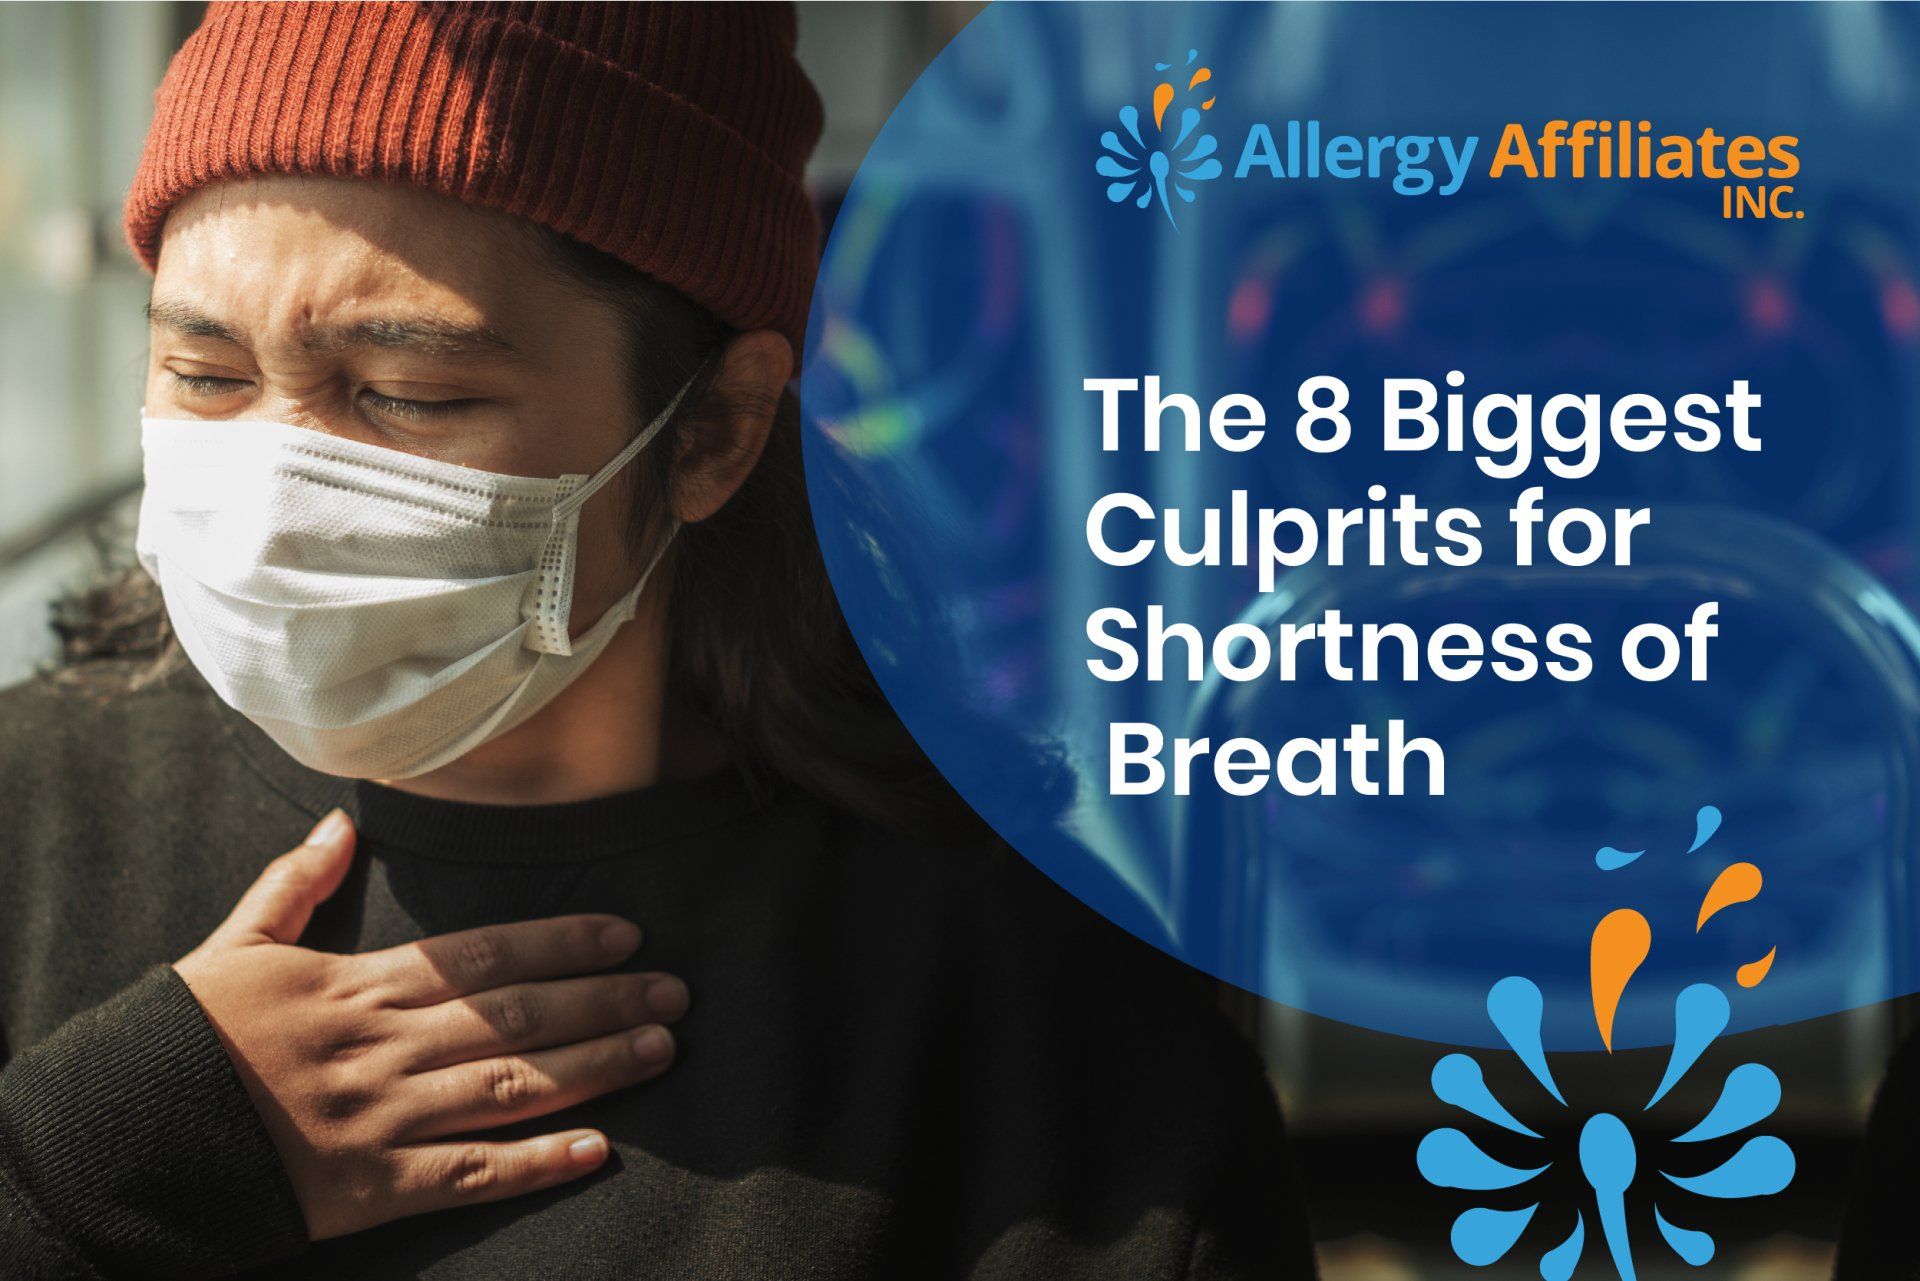 The 8 Biggest Culprits for Shortness of Breath